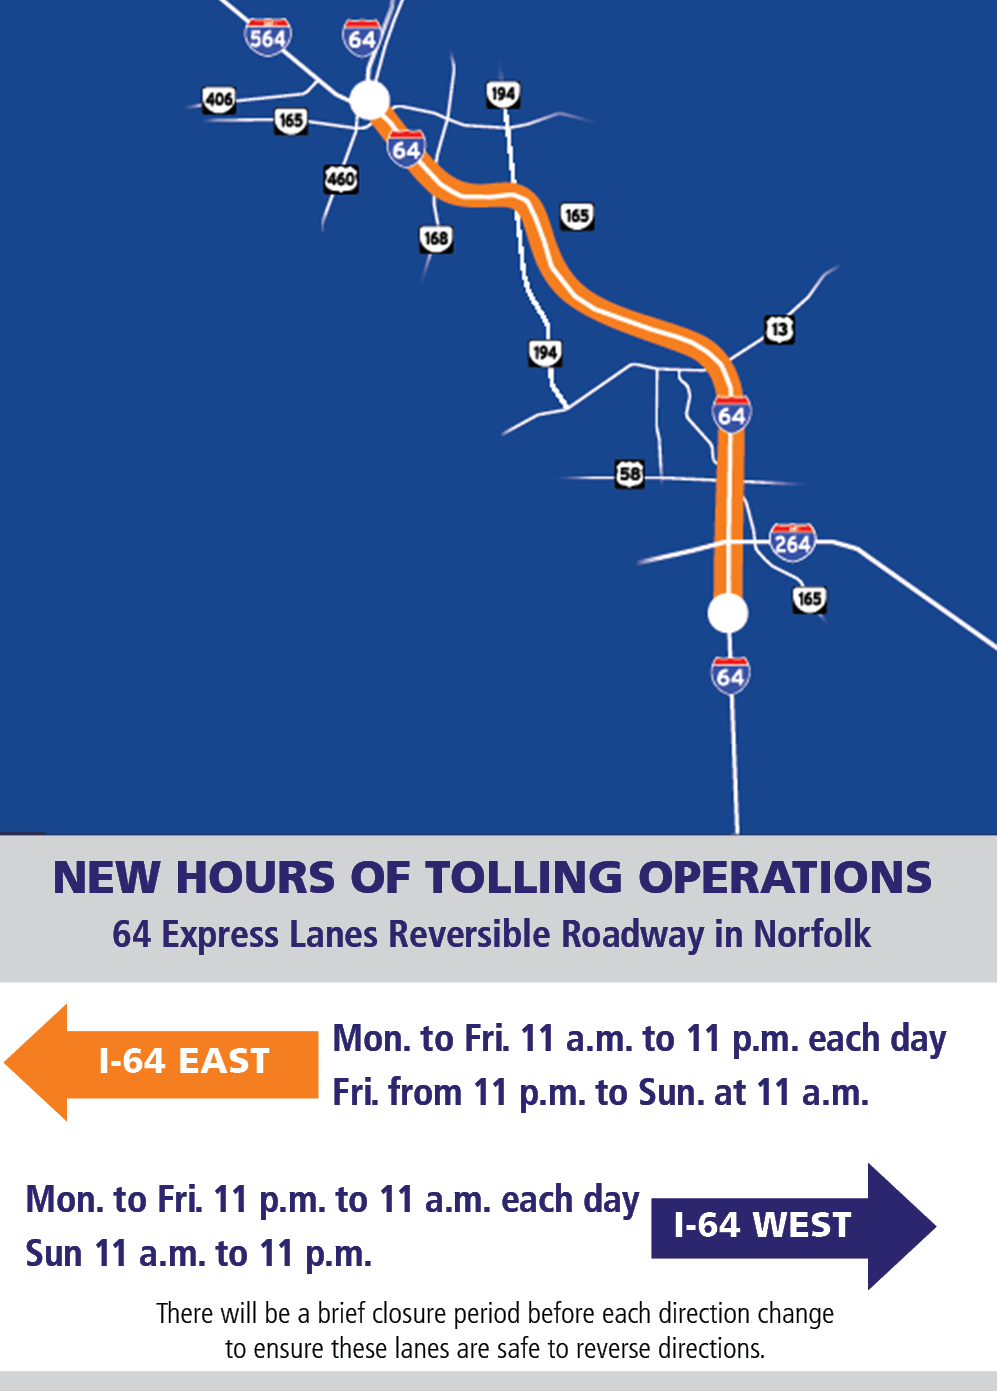 New Hours of Tolling Operations for 64 Express Lanes Reversible Roadway in Norfolk